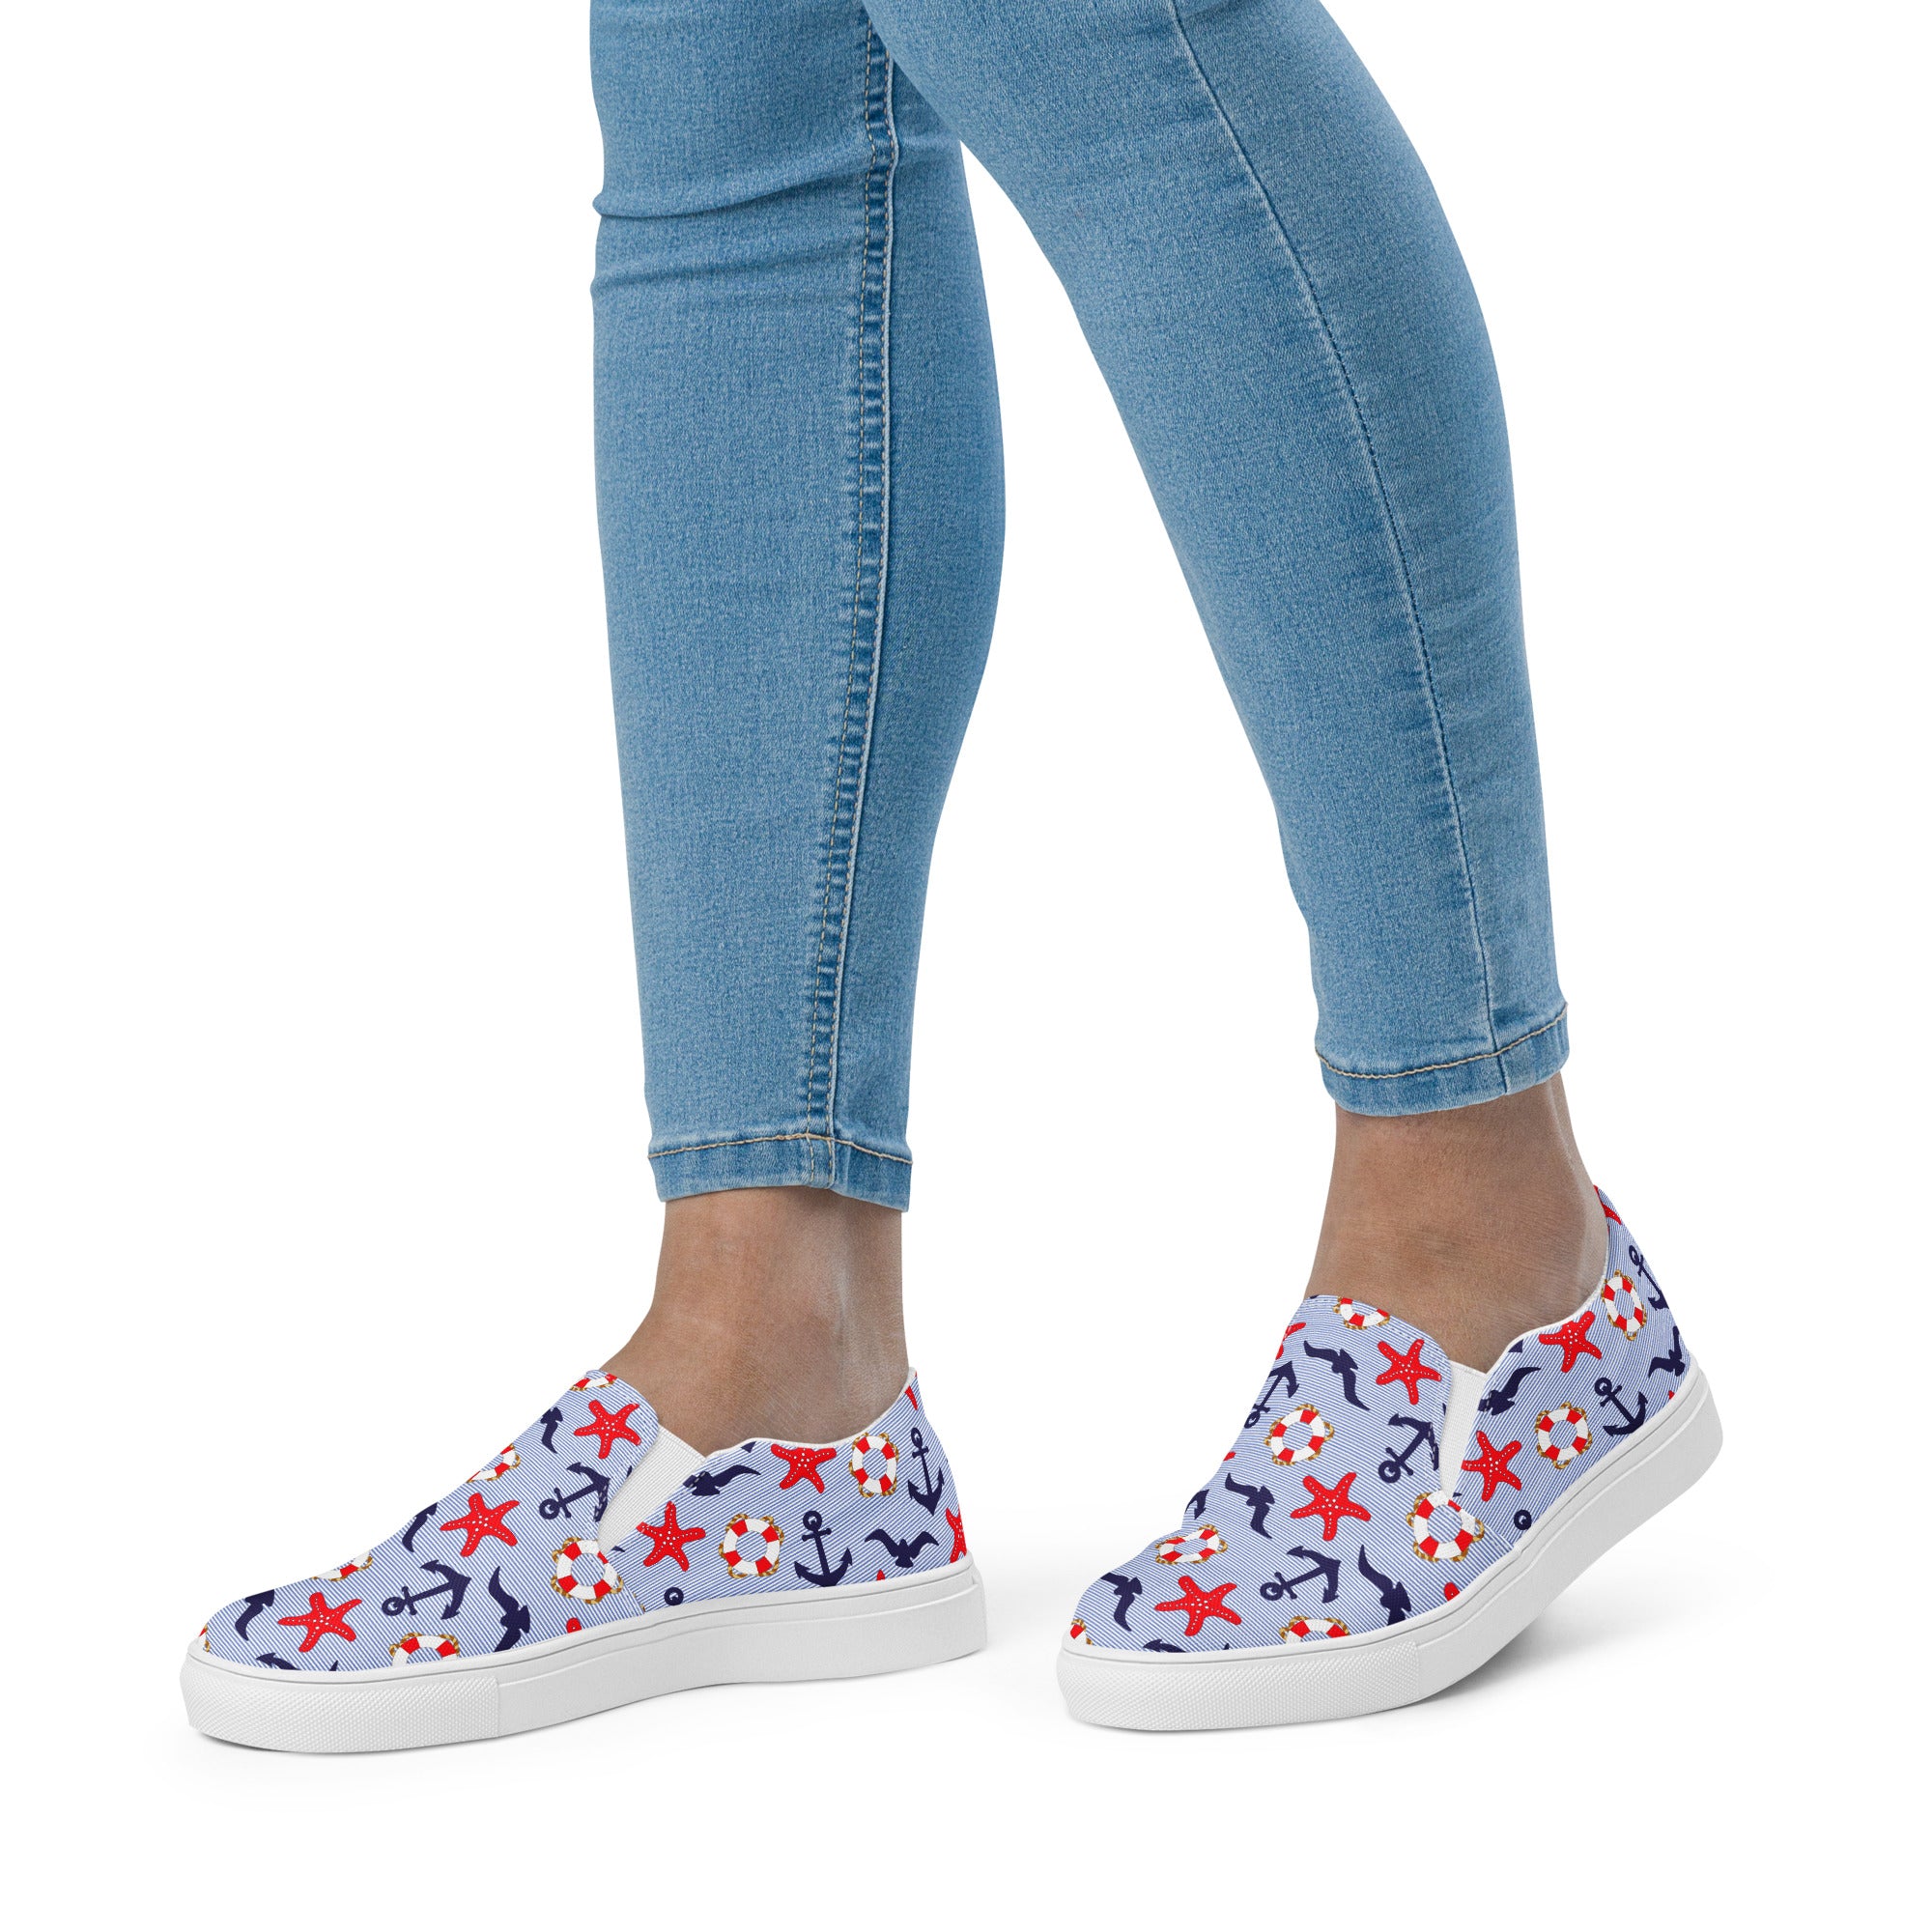 "The Cape Mays" Women’s Slip-on Canvas Shoes